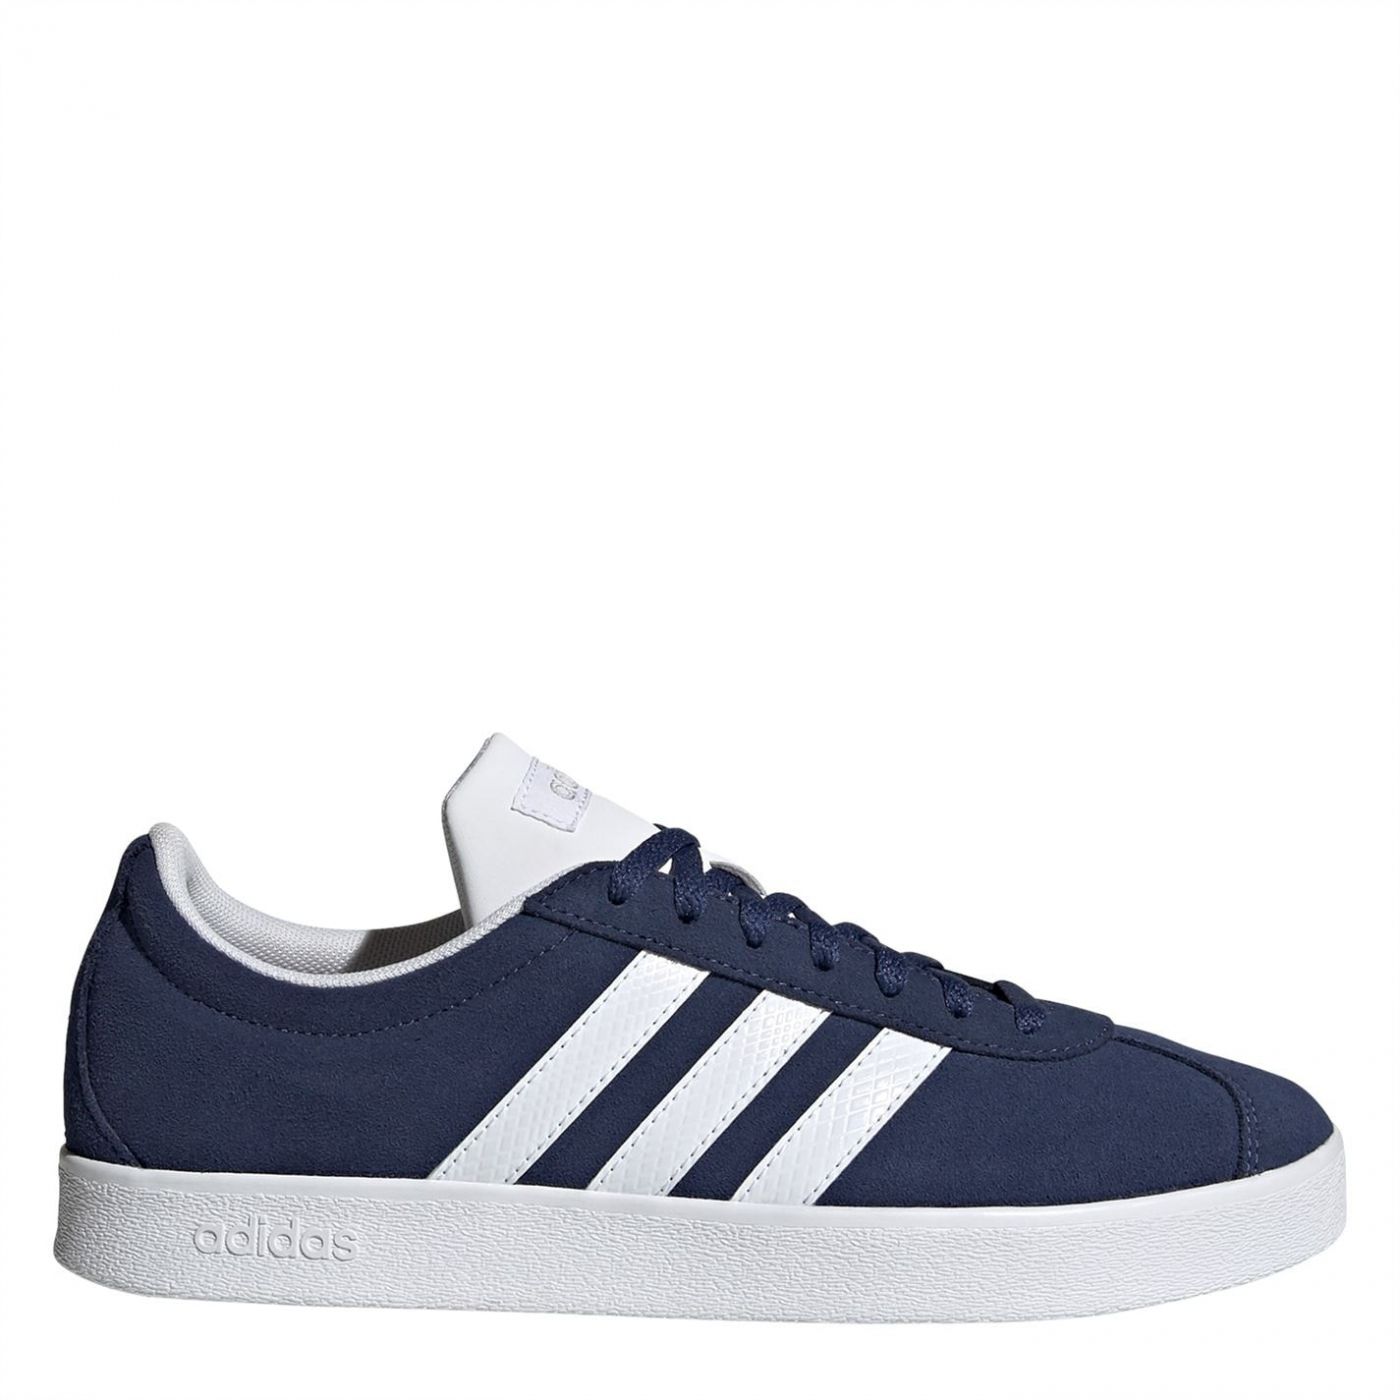 Adidas VL Court Suede Womens Trainers